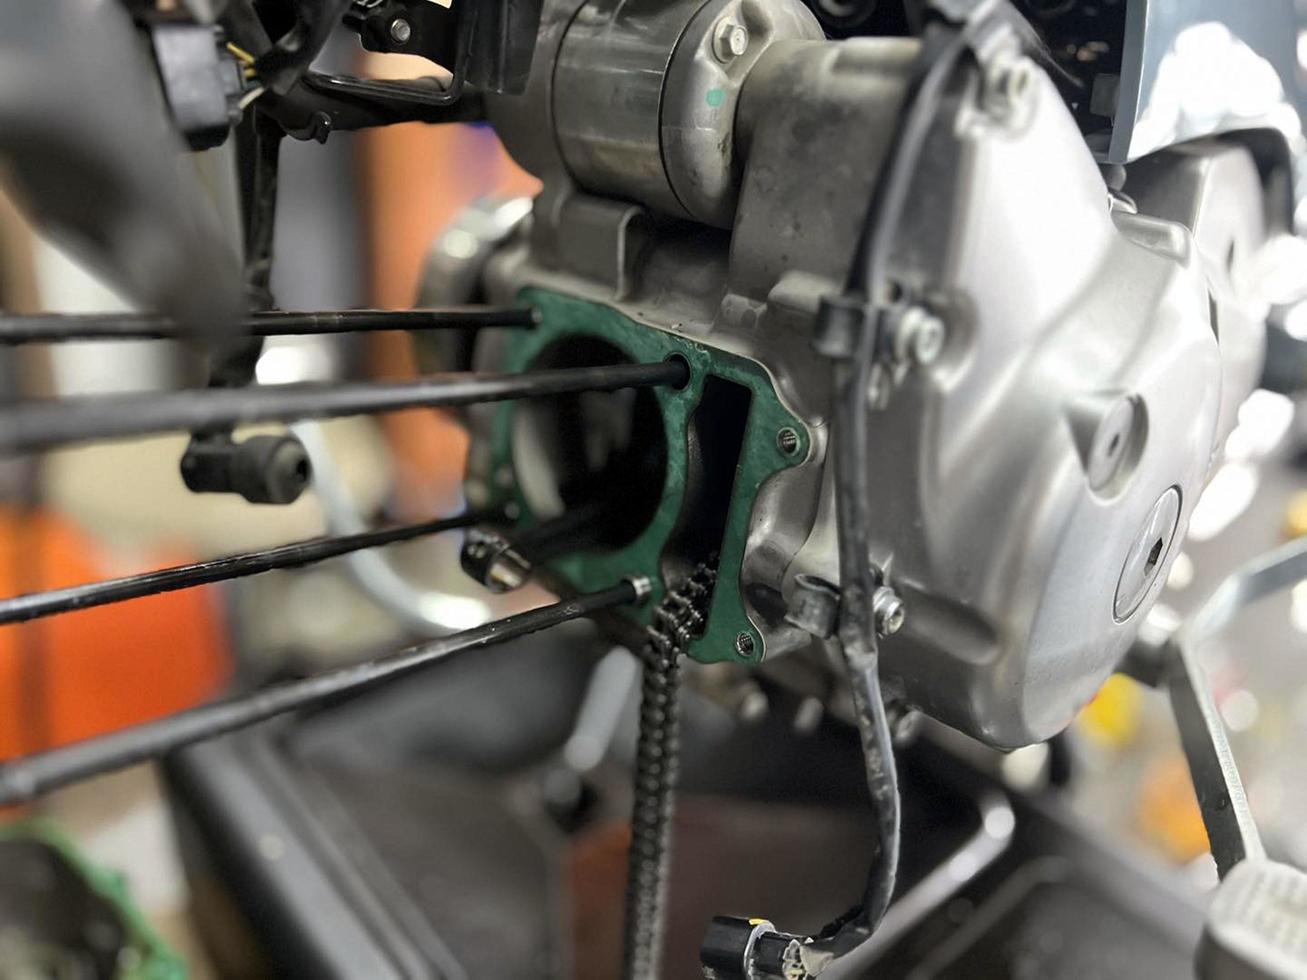 motorcycle service engine repair close up.  Maintenance of motorcycle engine. photo